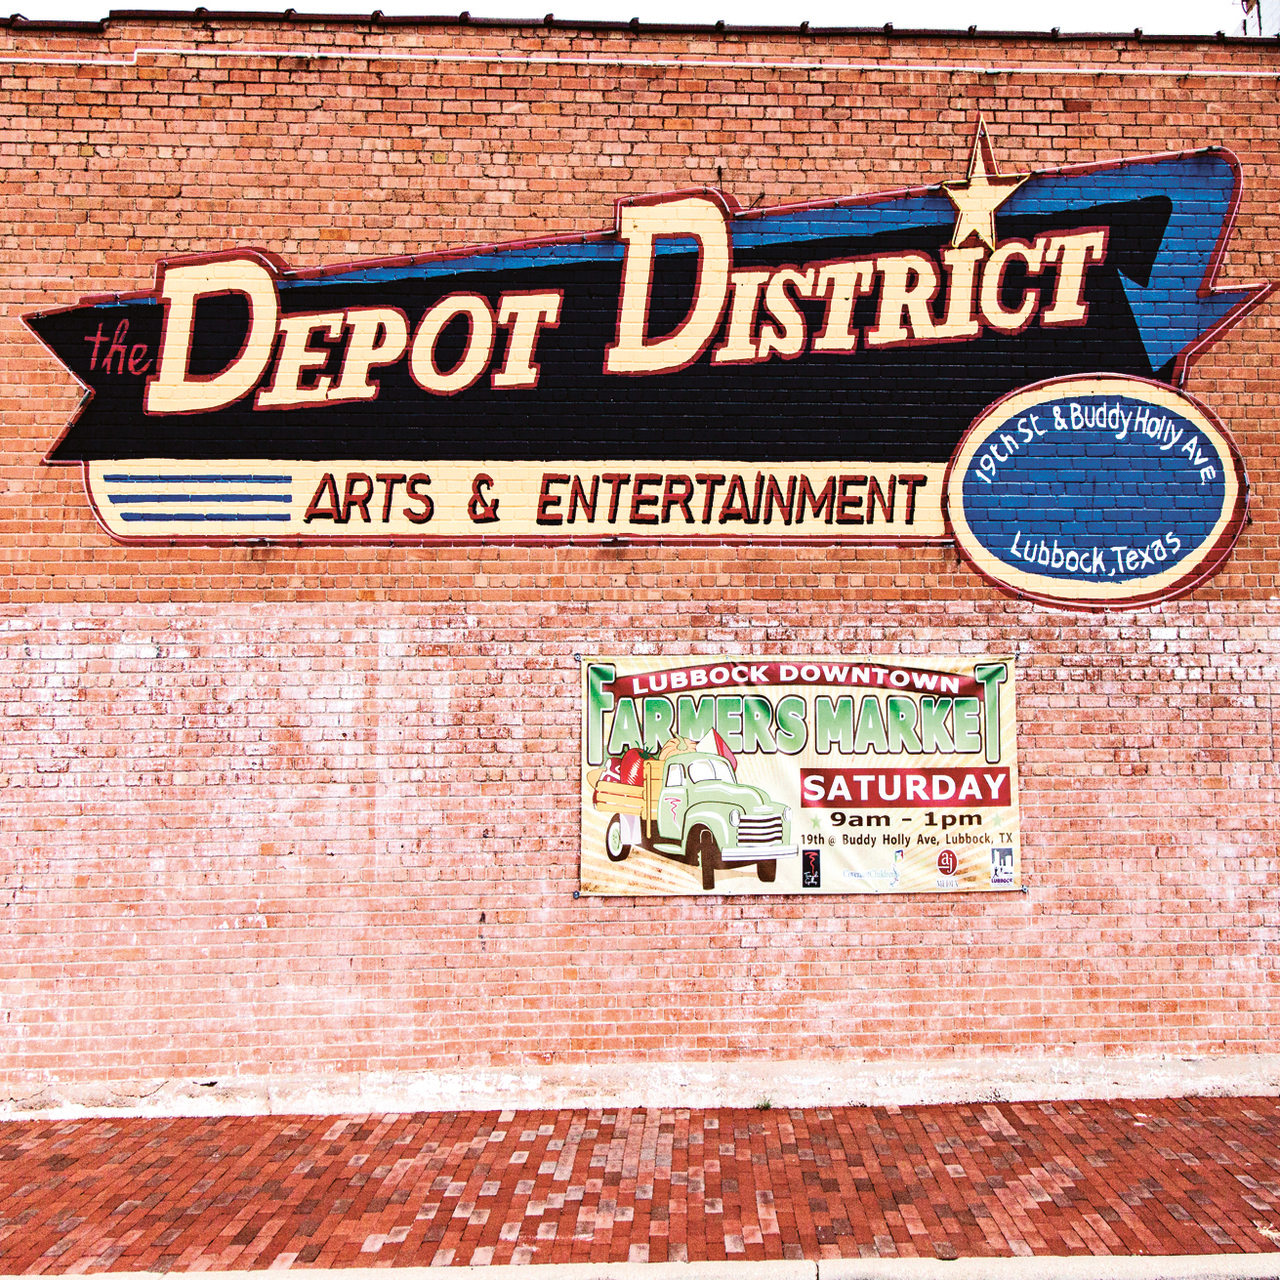 The Depot District